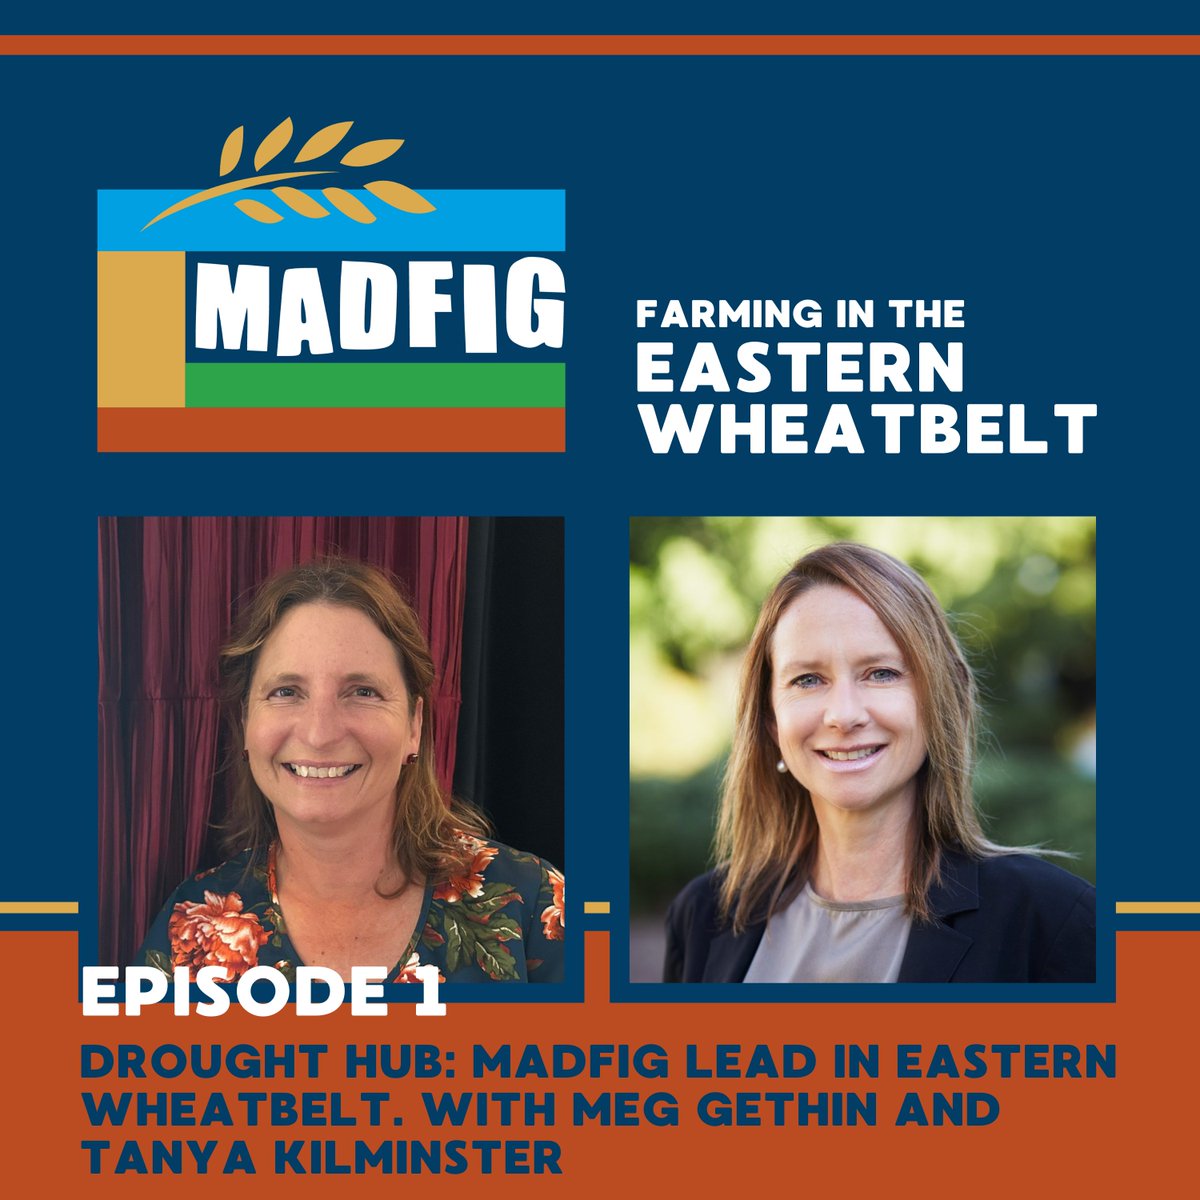 📢 Farmers in the Eastern Wheatbelt – this one’s for you! Tanya Kilminster and Meg Gethin joined @MADFIG14 to share their experiences farming in the area and discuss why the Future Drought Fund Program is vital for our future 💧 Listen in ➡️ open.spotify.com/episode/1rOxEm…